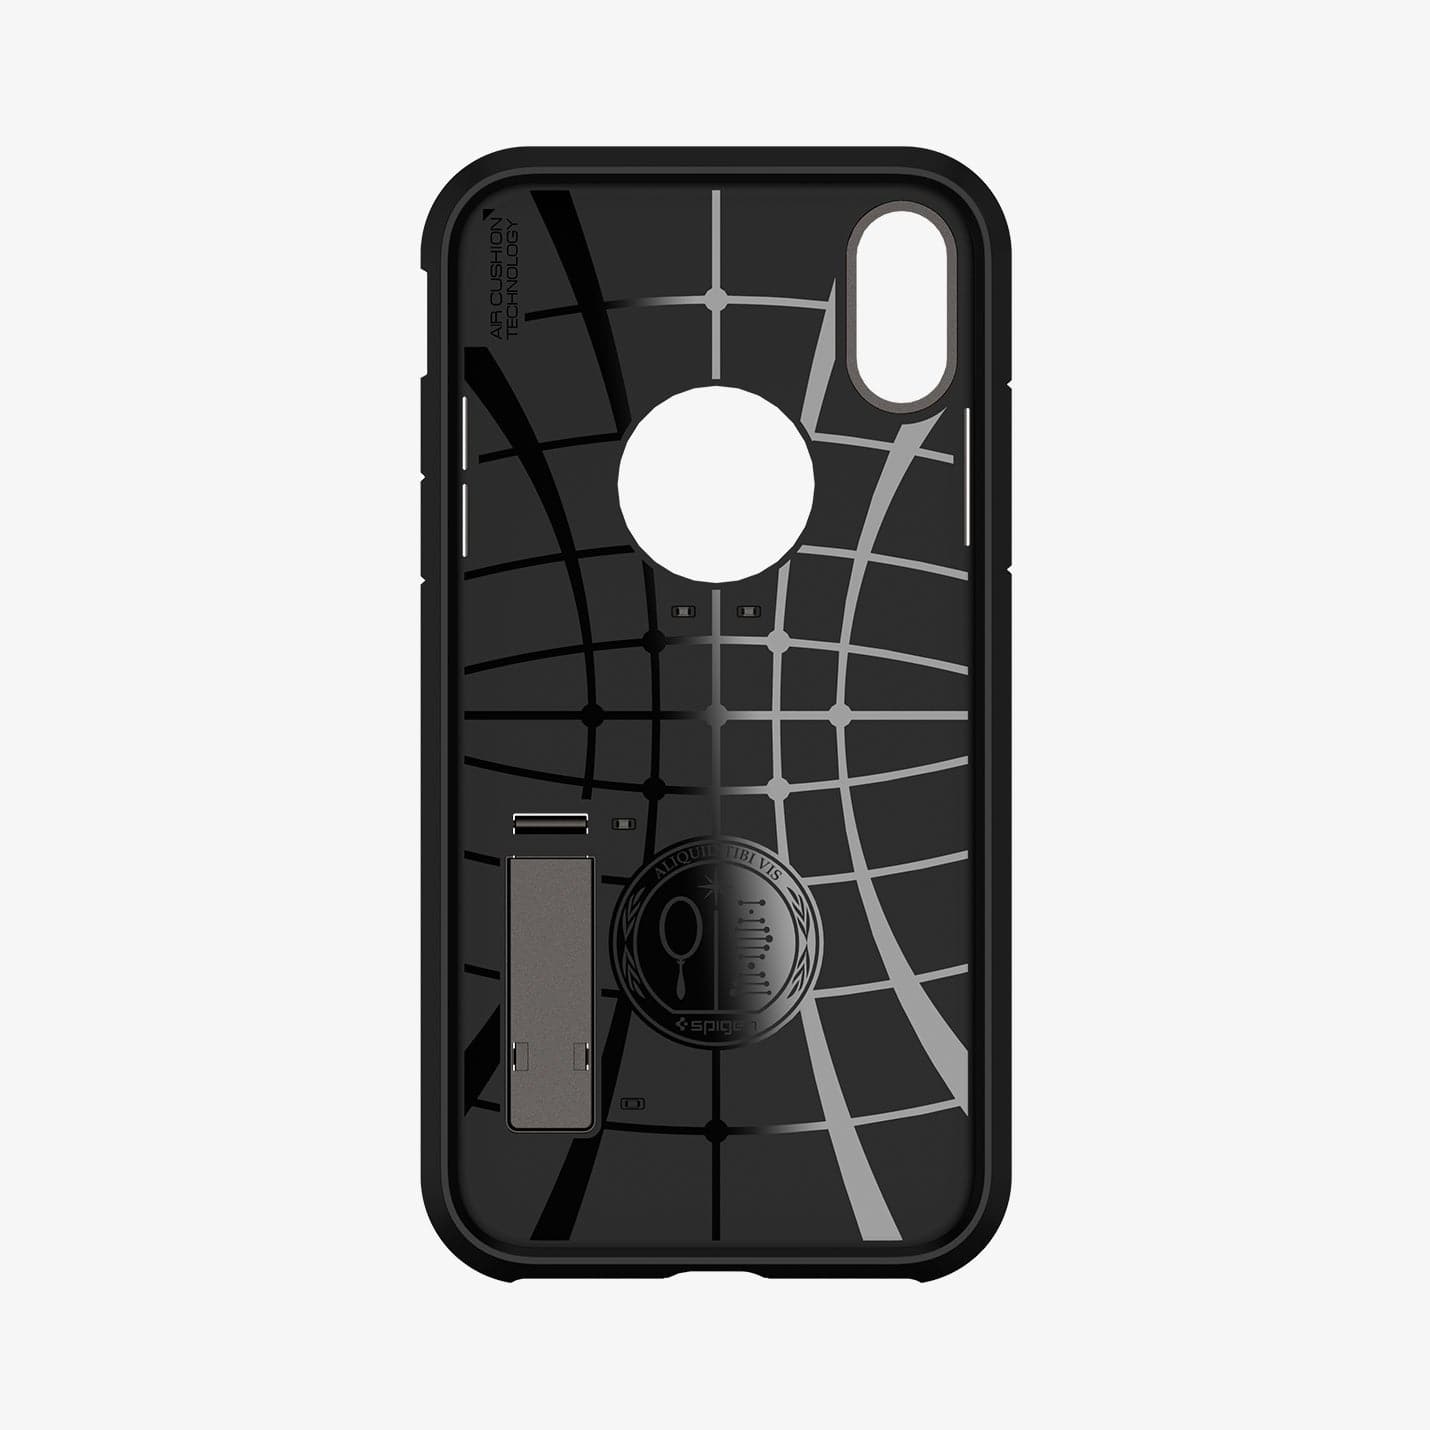 064CS24877 - iPhone XR Case Tough Armor in gunmetal showing the inside of case